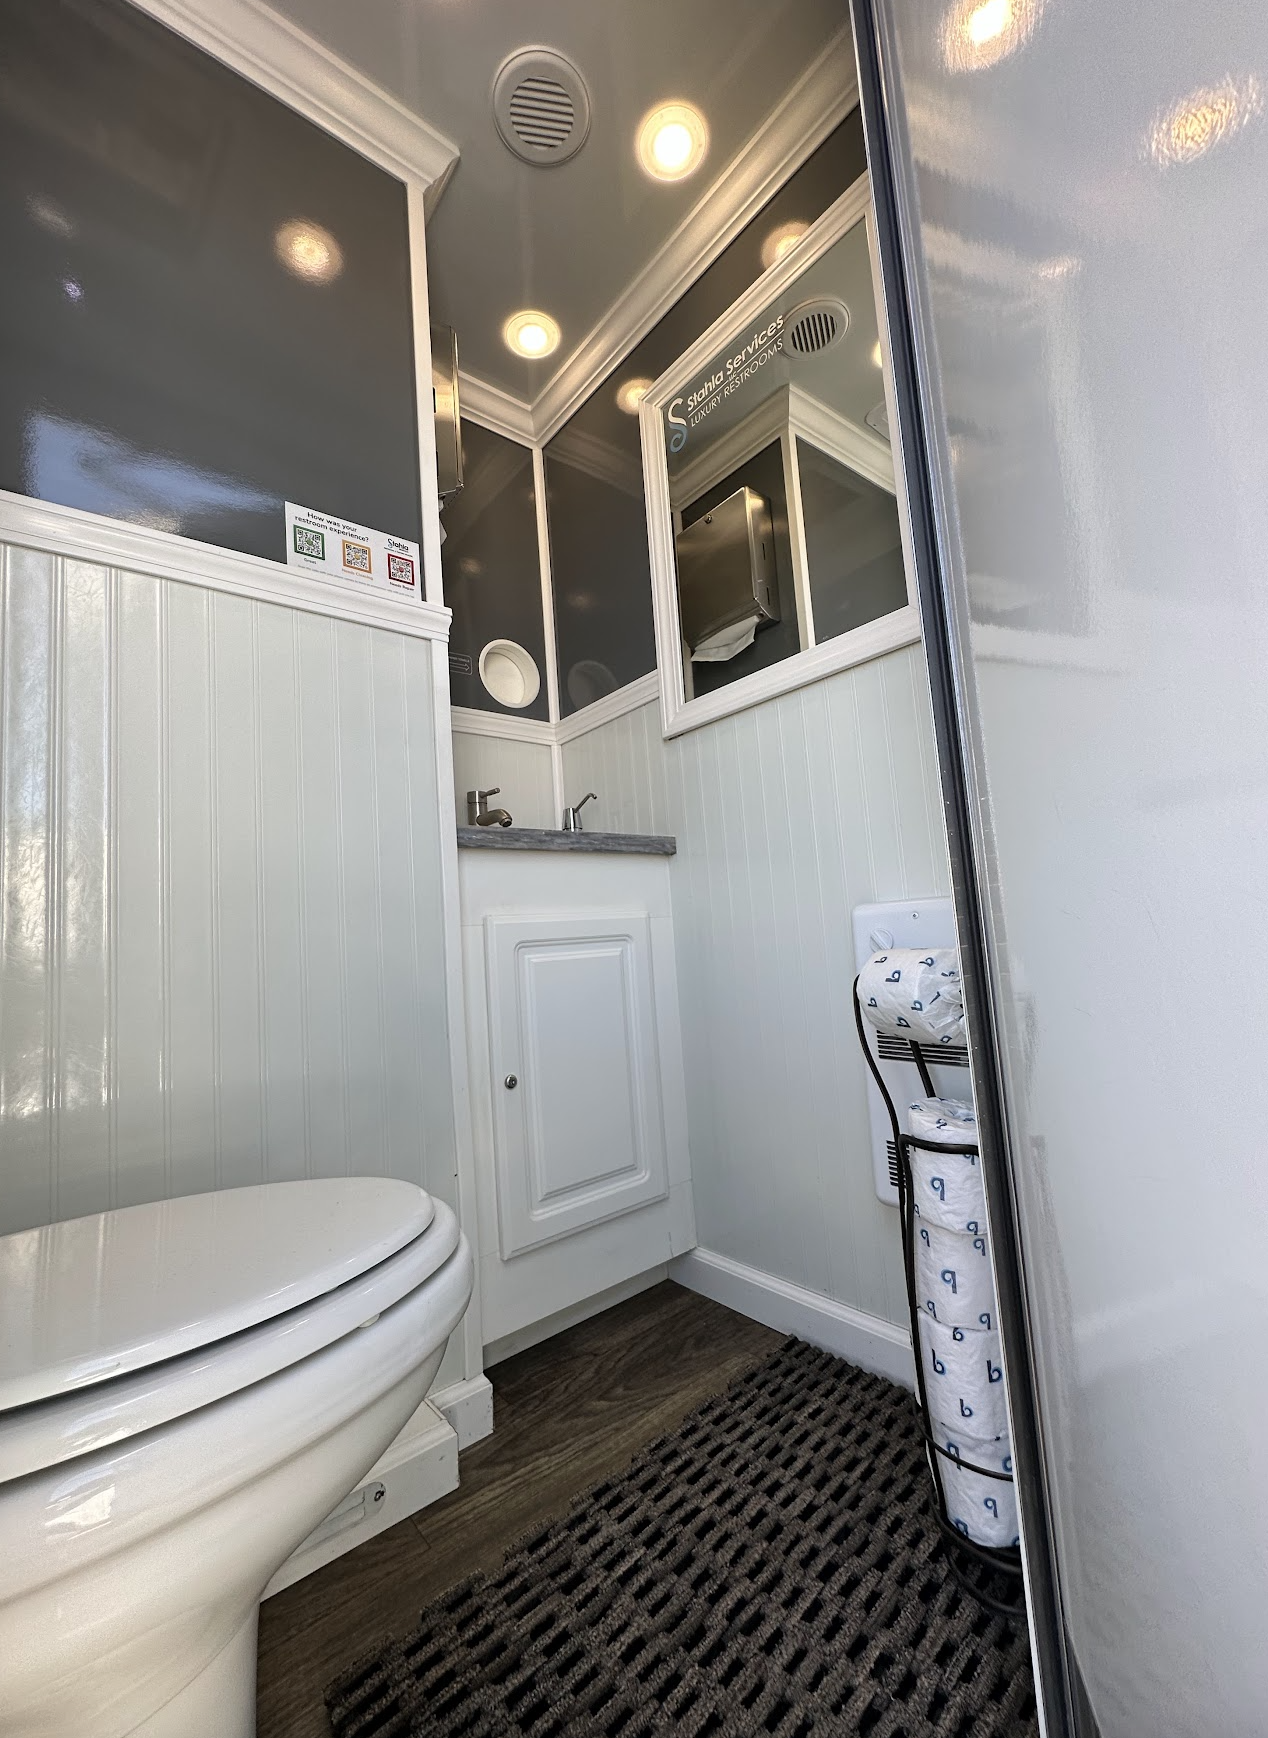 Shower and Restroom Trailer Rentals 1683141524 Screenshot 2023 05 01 at 11.16.08 AM - Discover the Benefits of a 4 Station Restroom Trailer for Your Event!